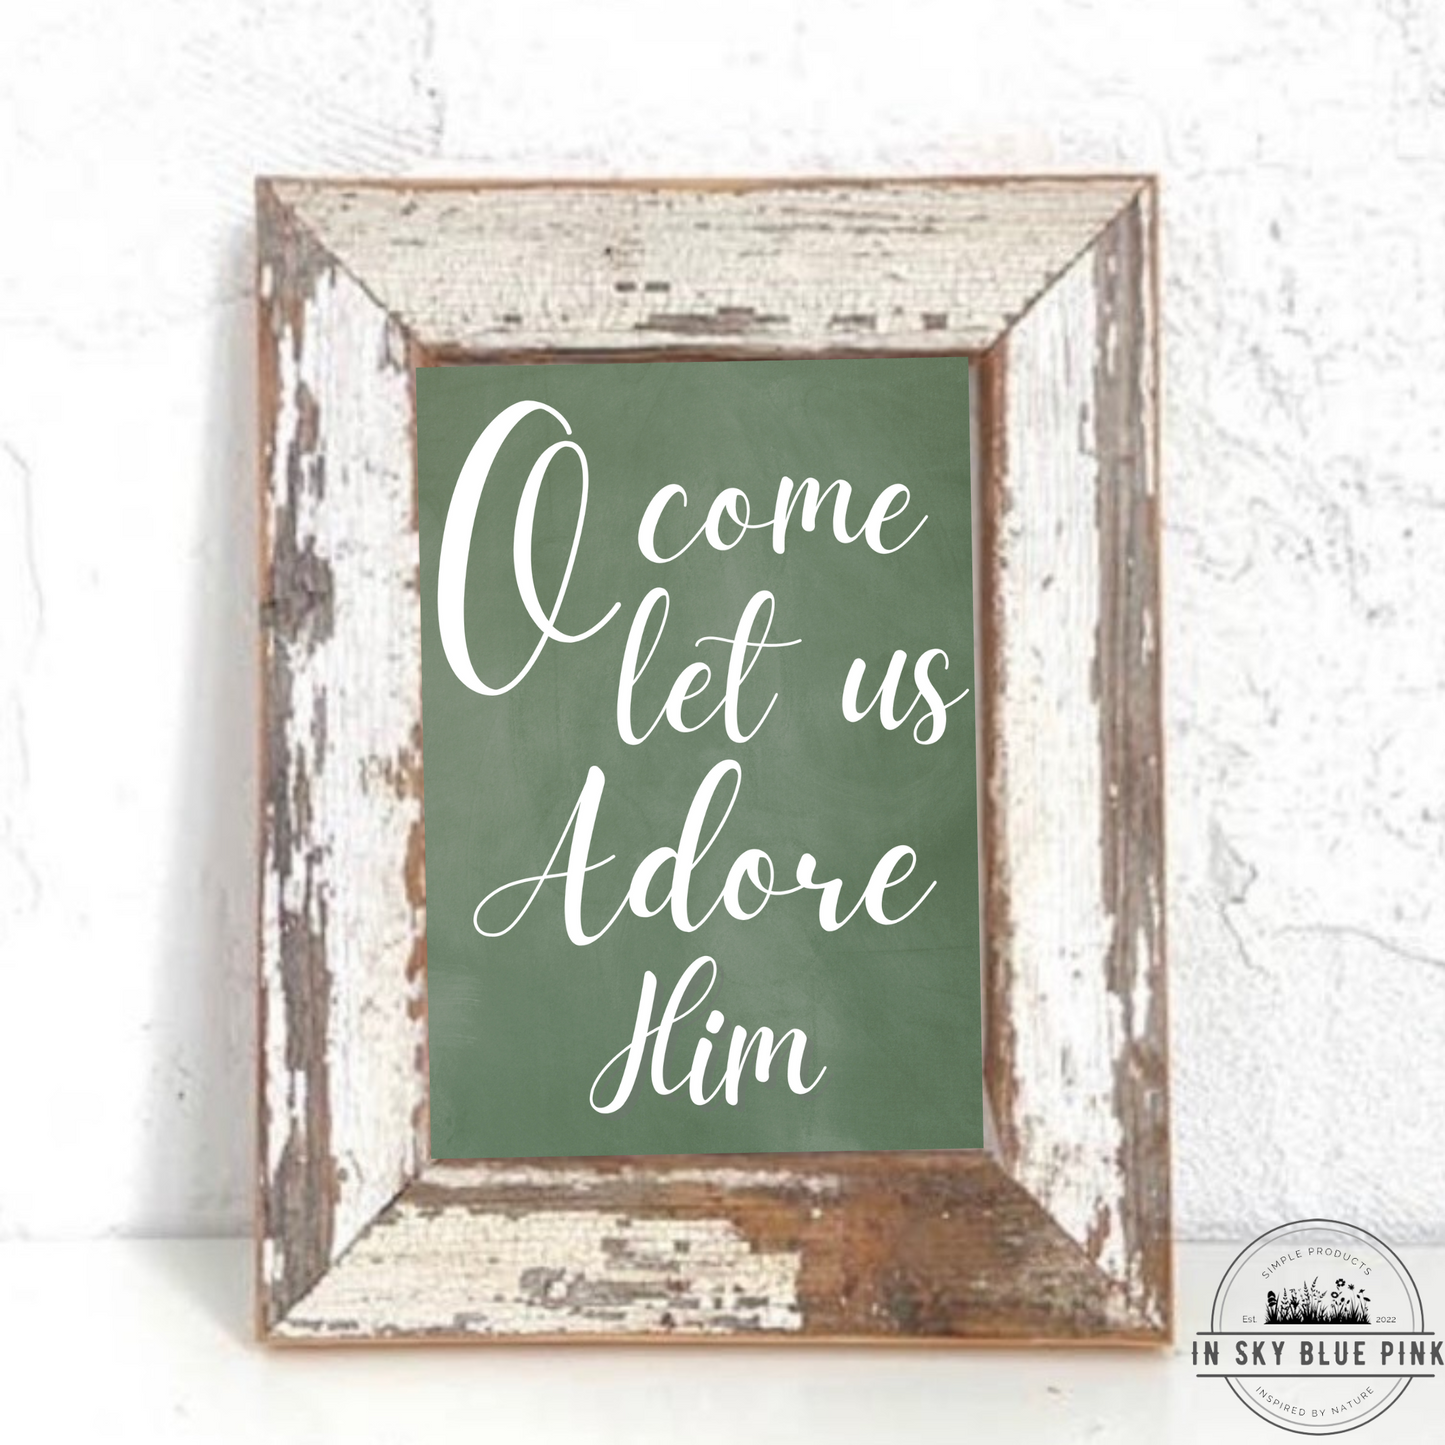 “O Come Let Us Adore Him” Chalkboard Holiday Prints & Rustic Reclaimed Barn Wood 8 x 10 Frame